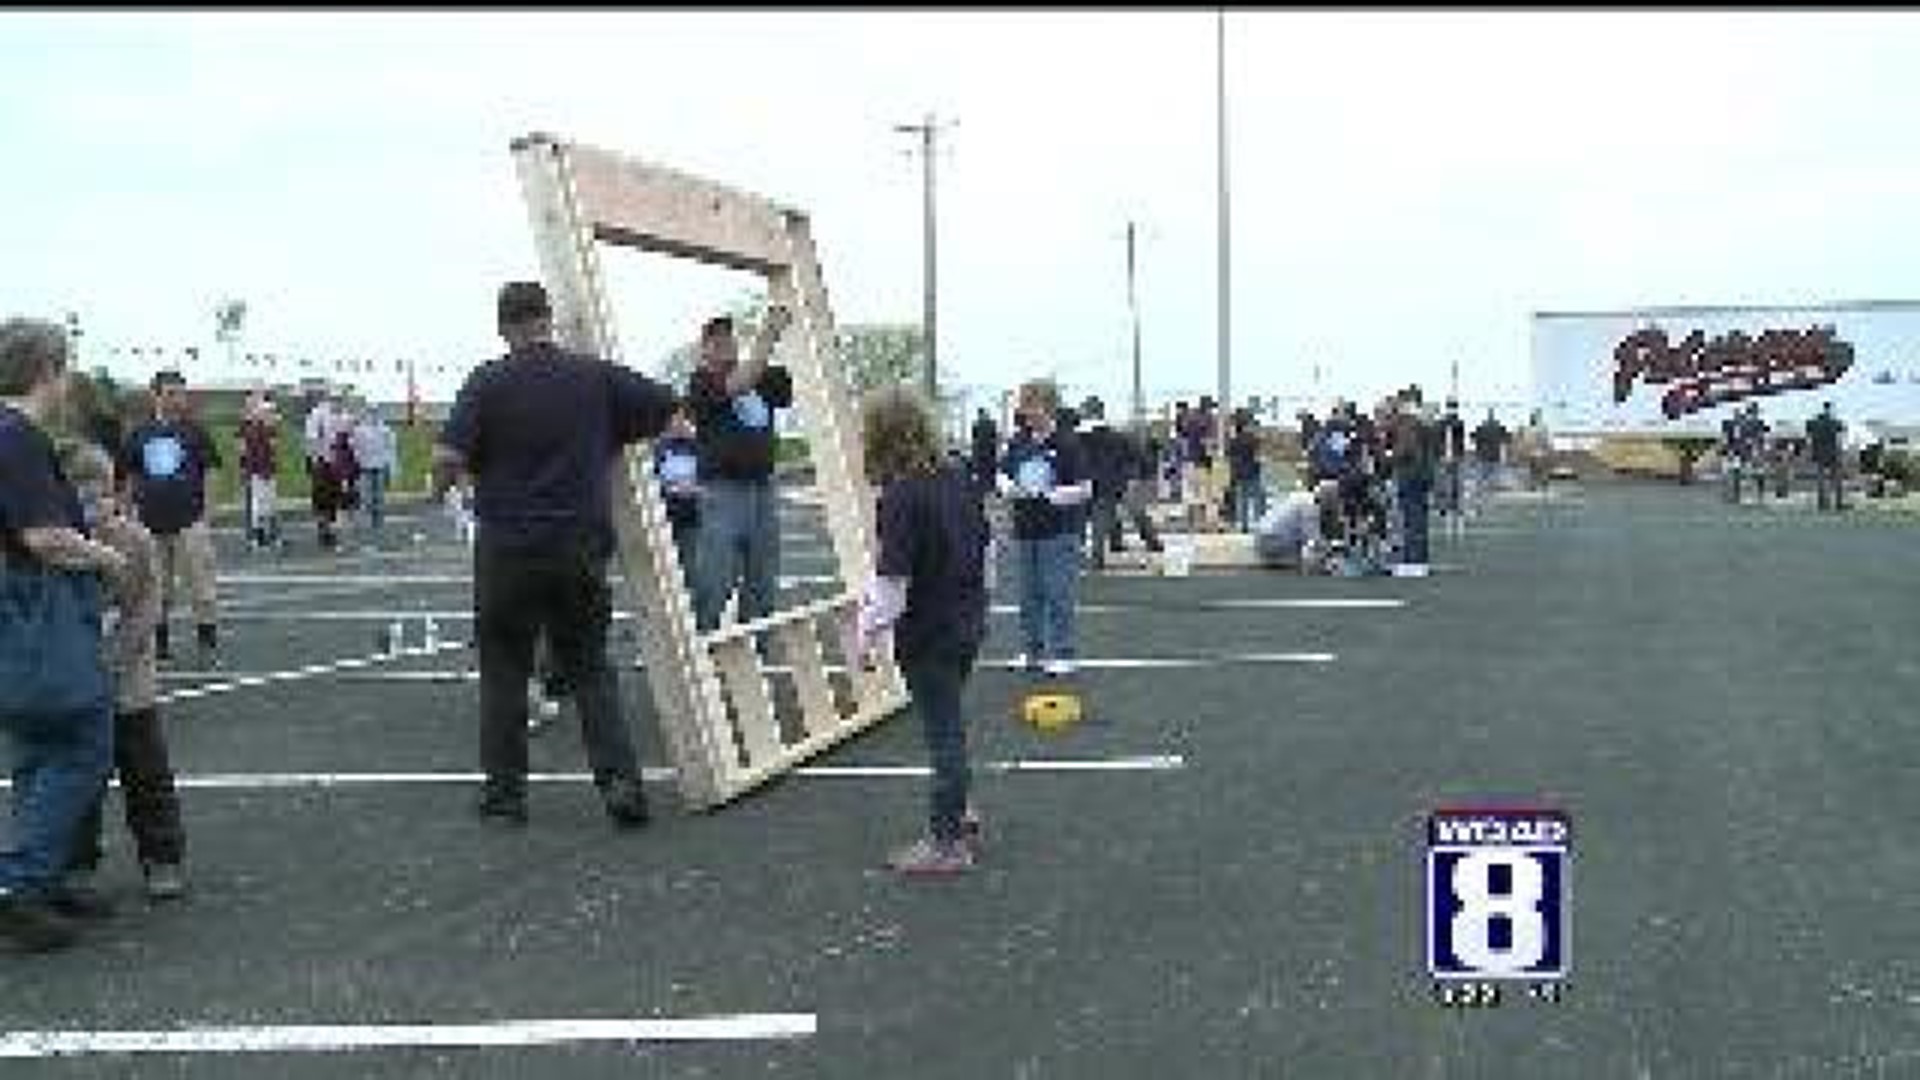 Church helps build homes for Habitat for Humanity